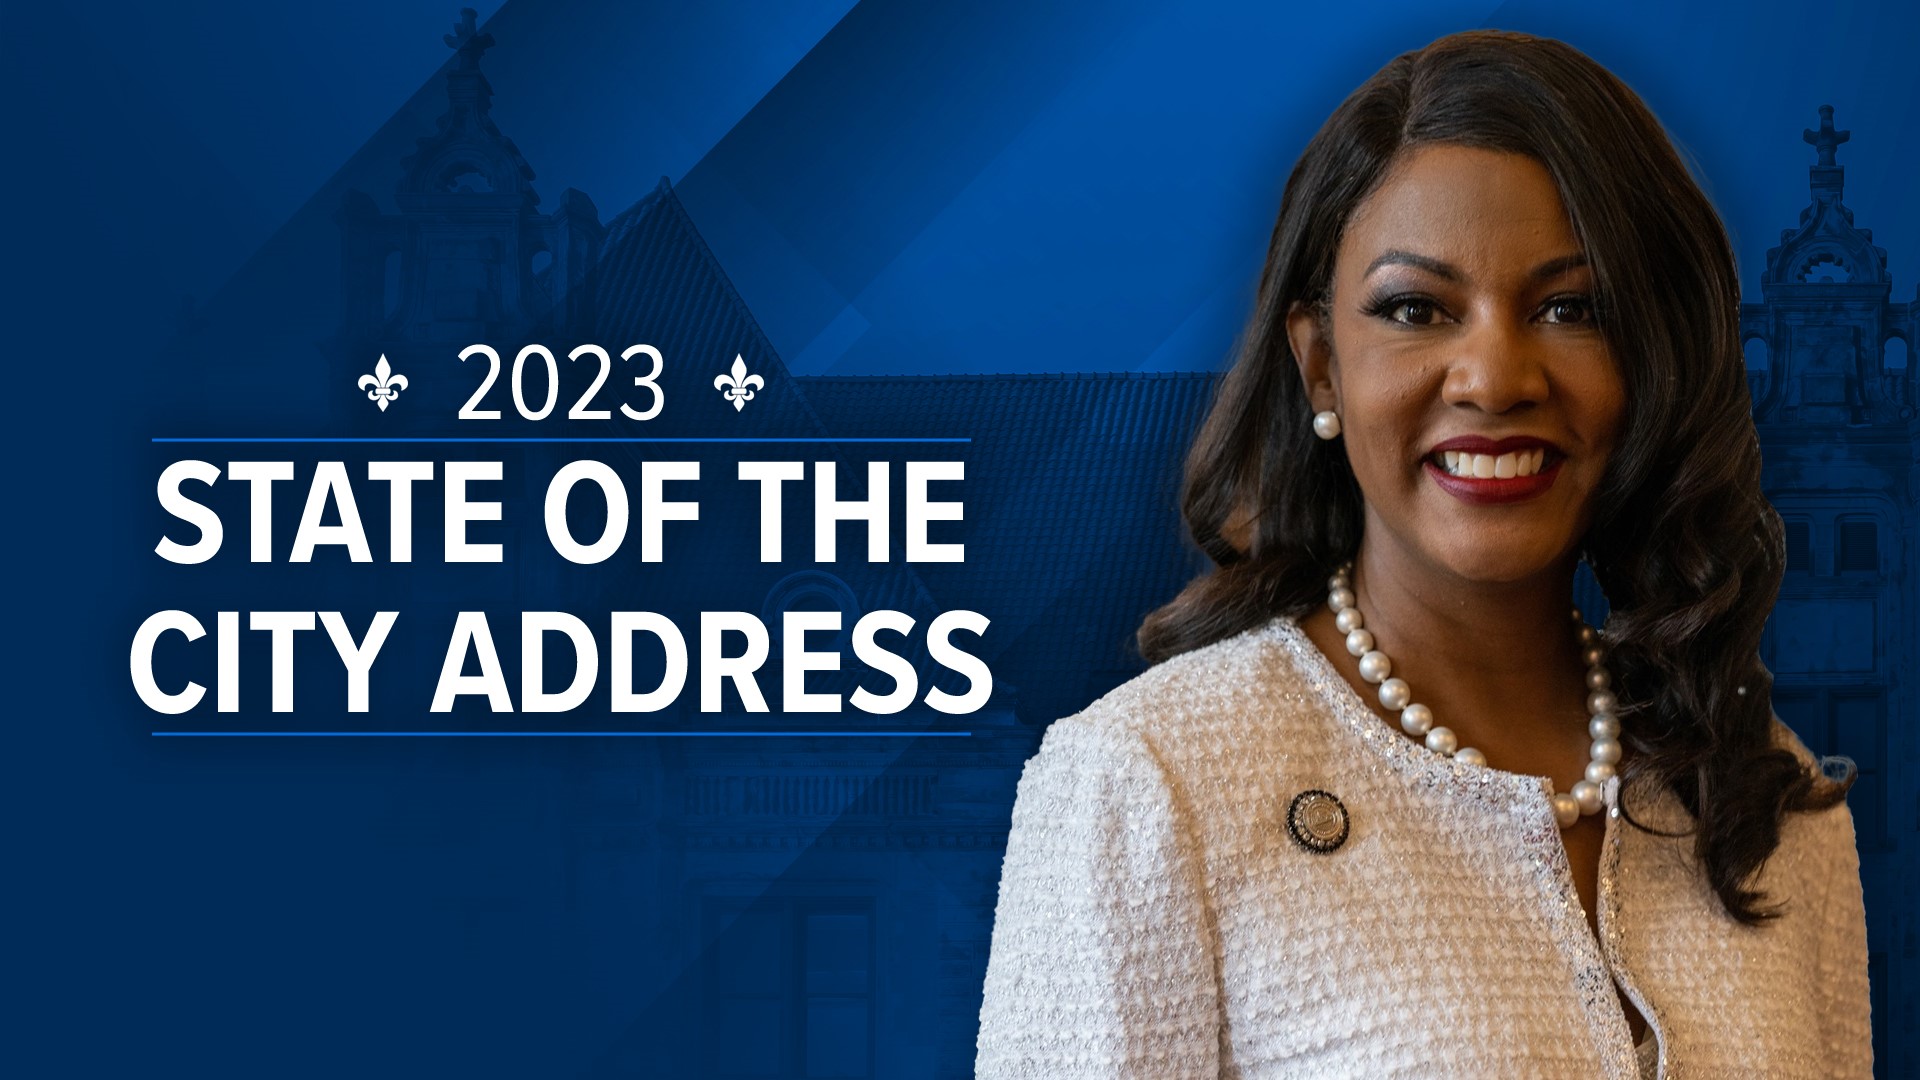 St. Louis Mayor Tishaura Jones delivered the 2023 State of the City Address from Saint Louis University on Tuesday night.